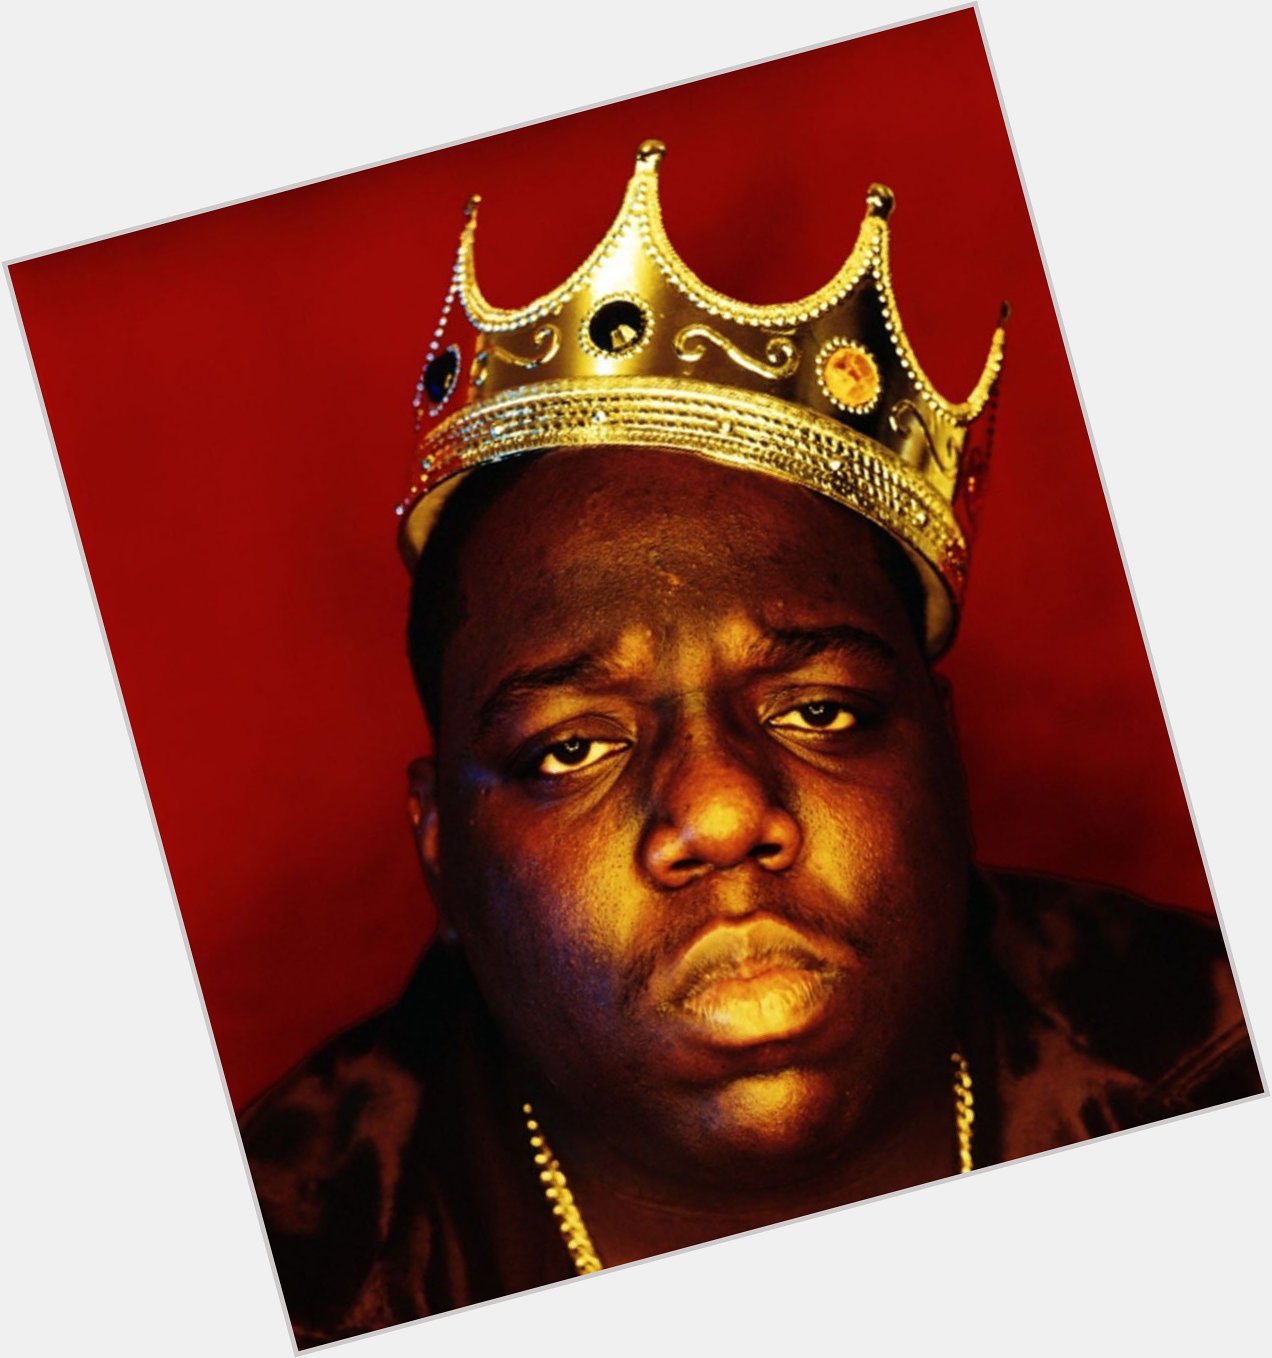 Happy Birthday Notorious B.I.G. 
1972-1997
Rest In Peace    